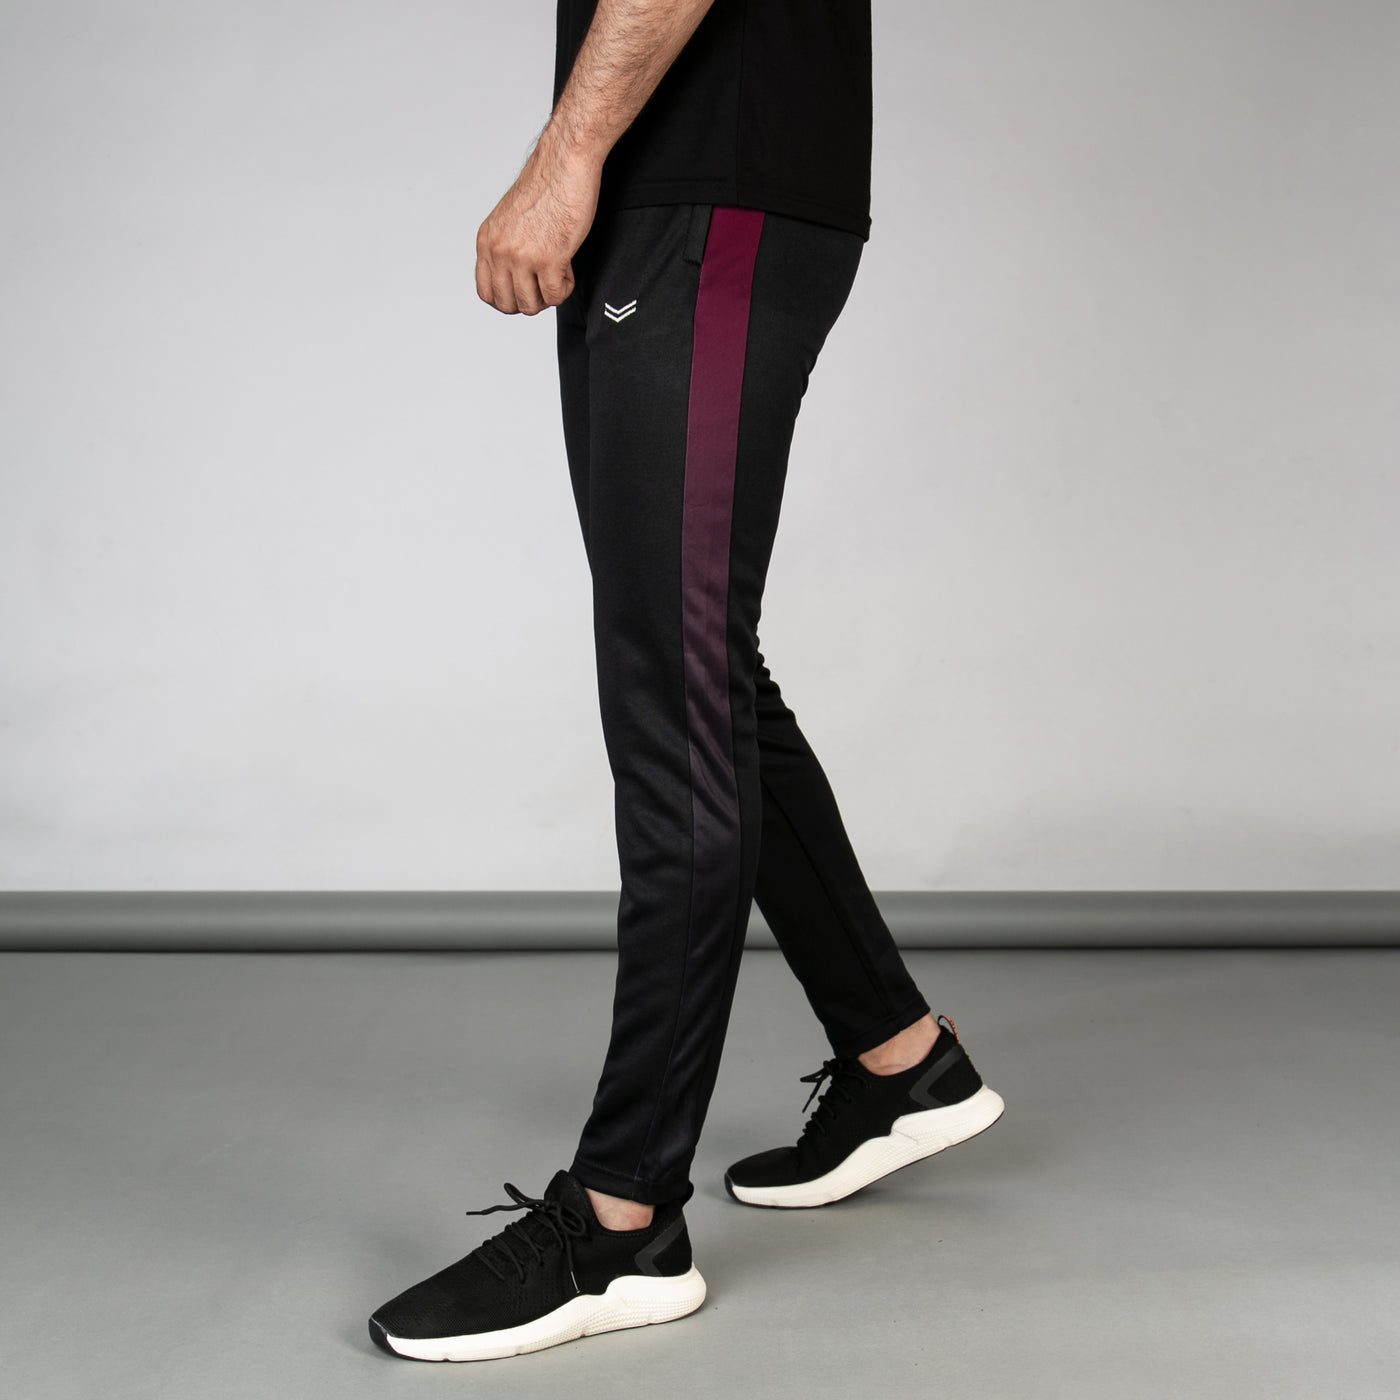 Black Quick Dry Bottoms with Maroon Gradient Panels